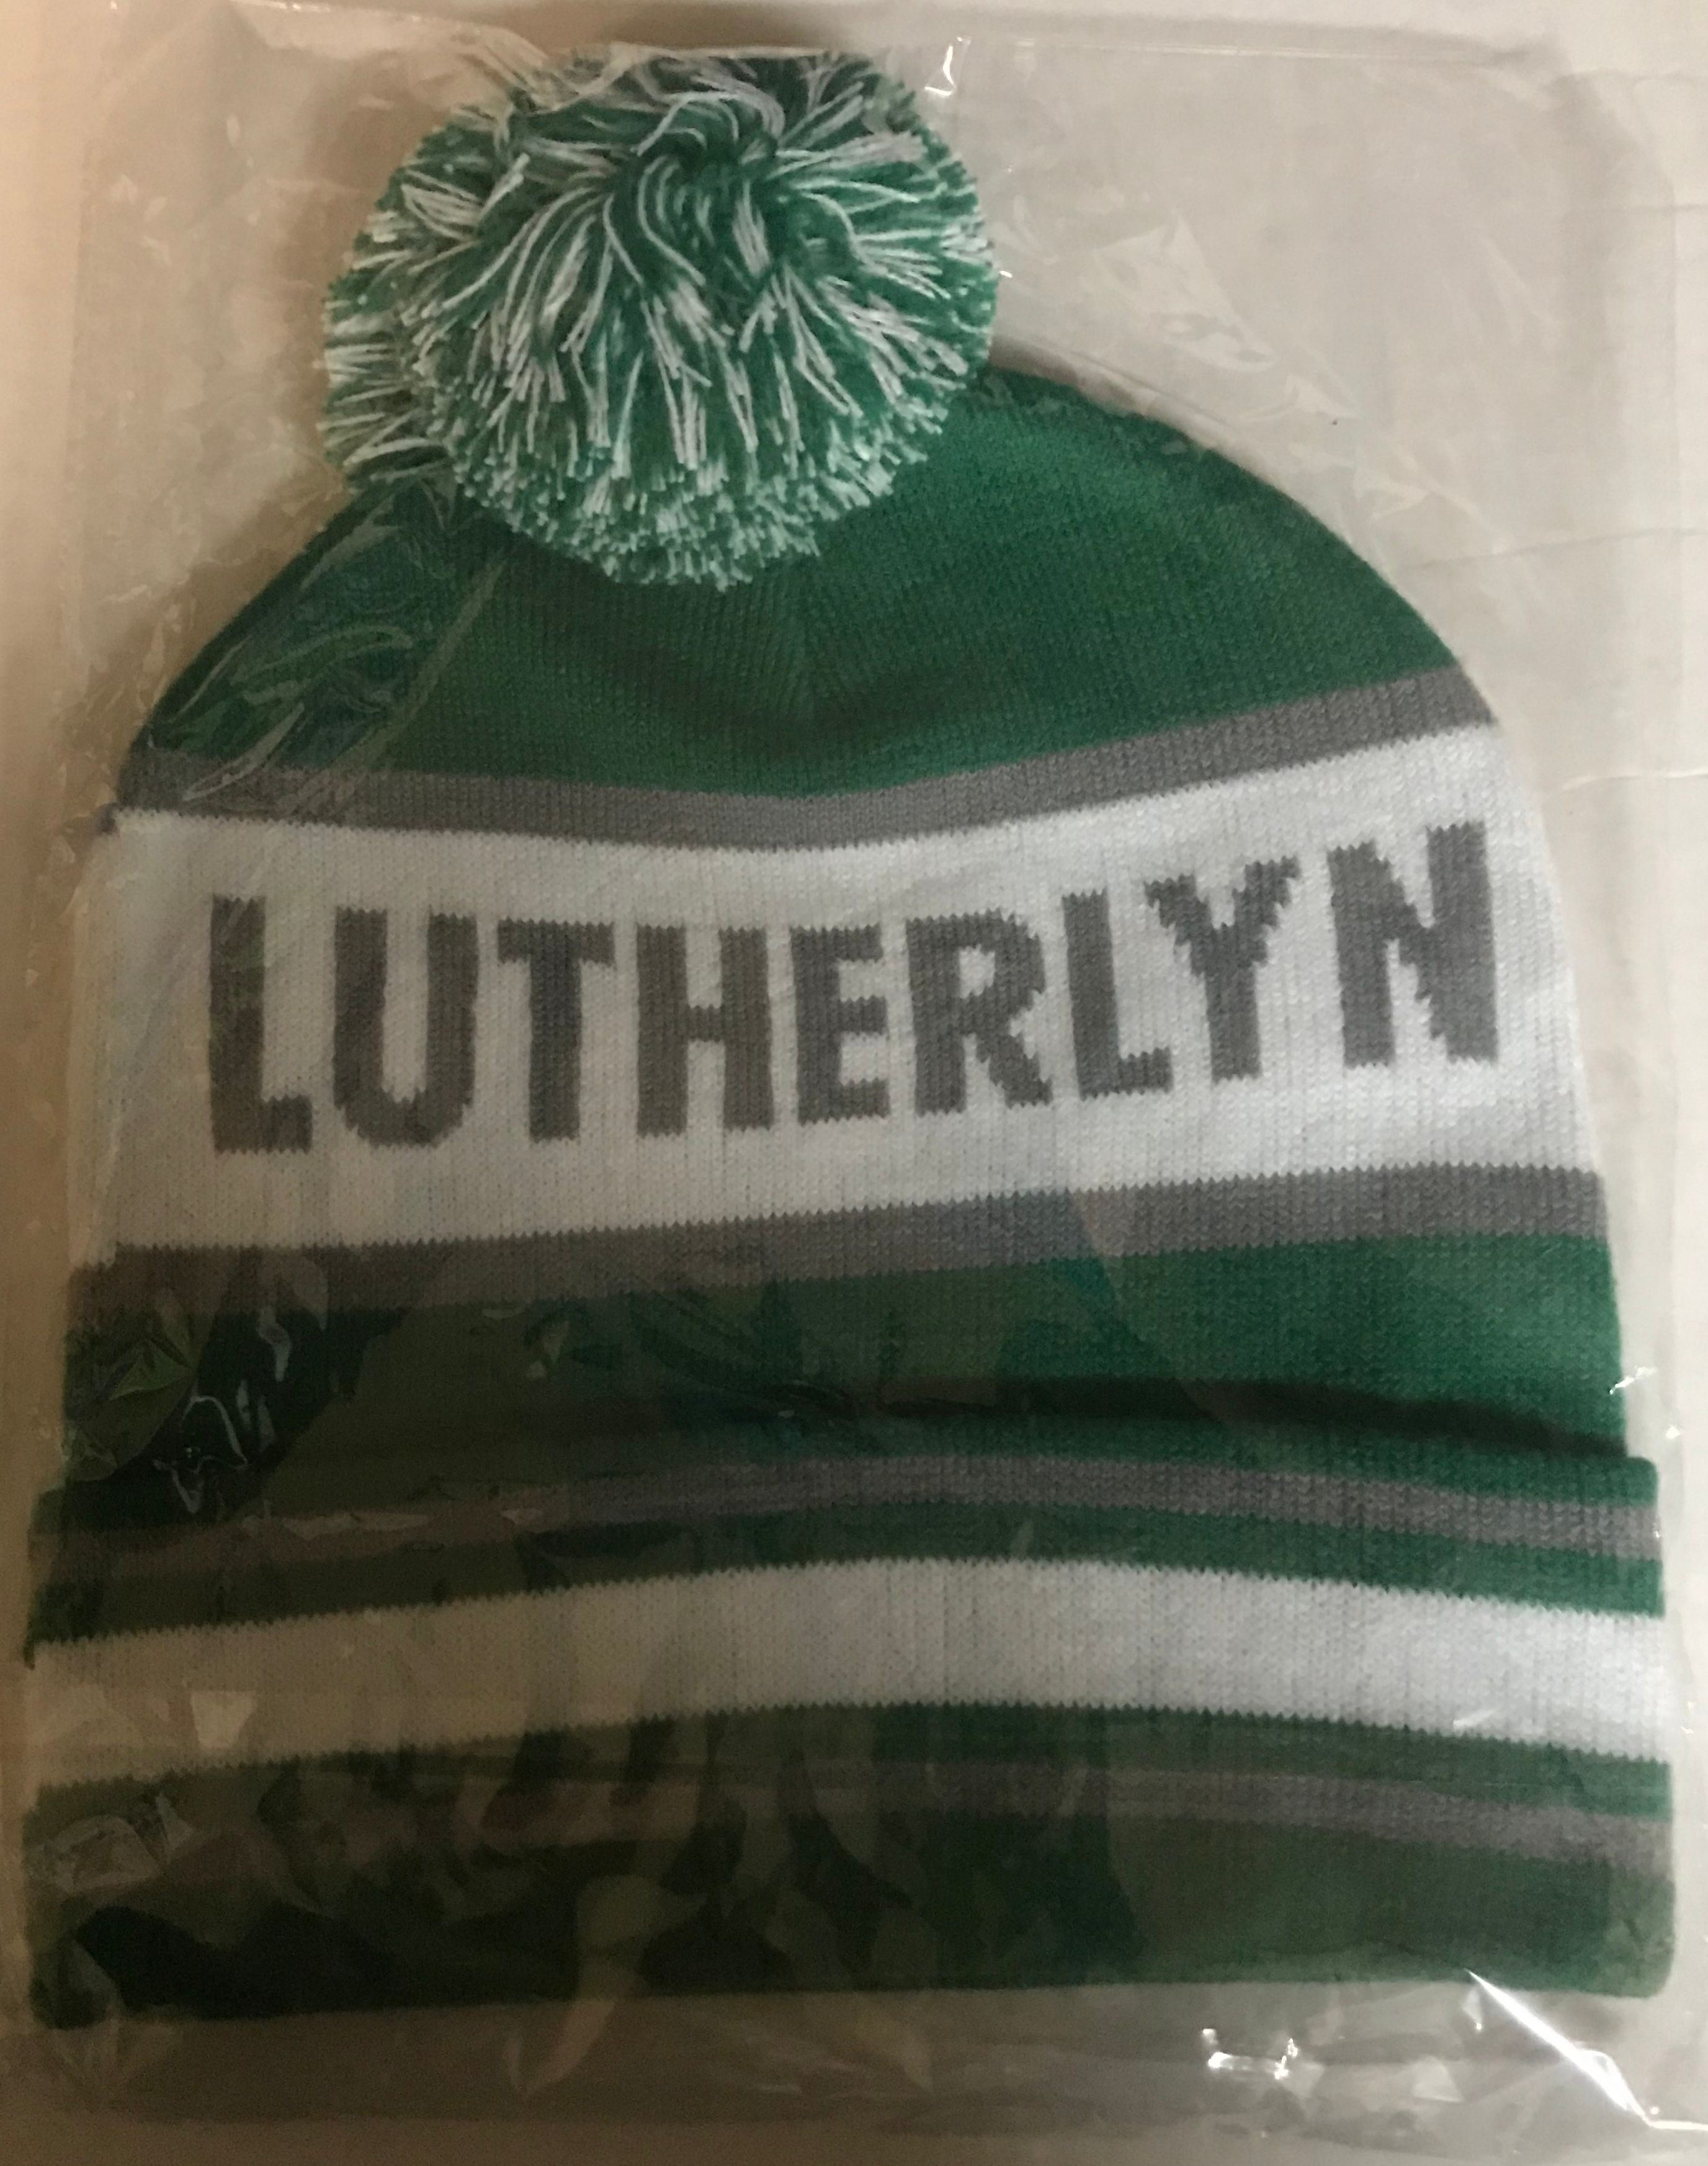 Lutherlyn Winter Hat ($12)